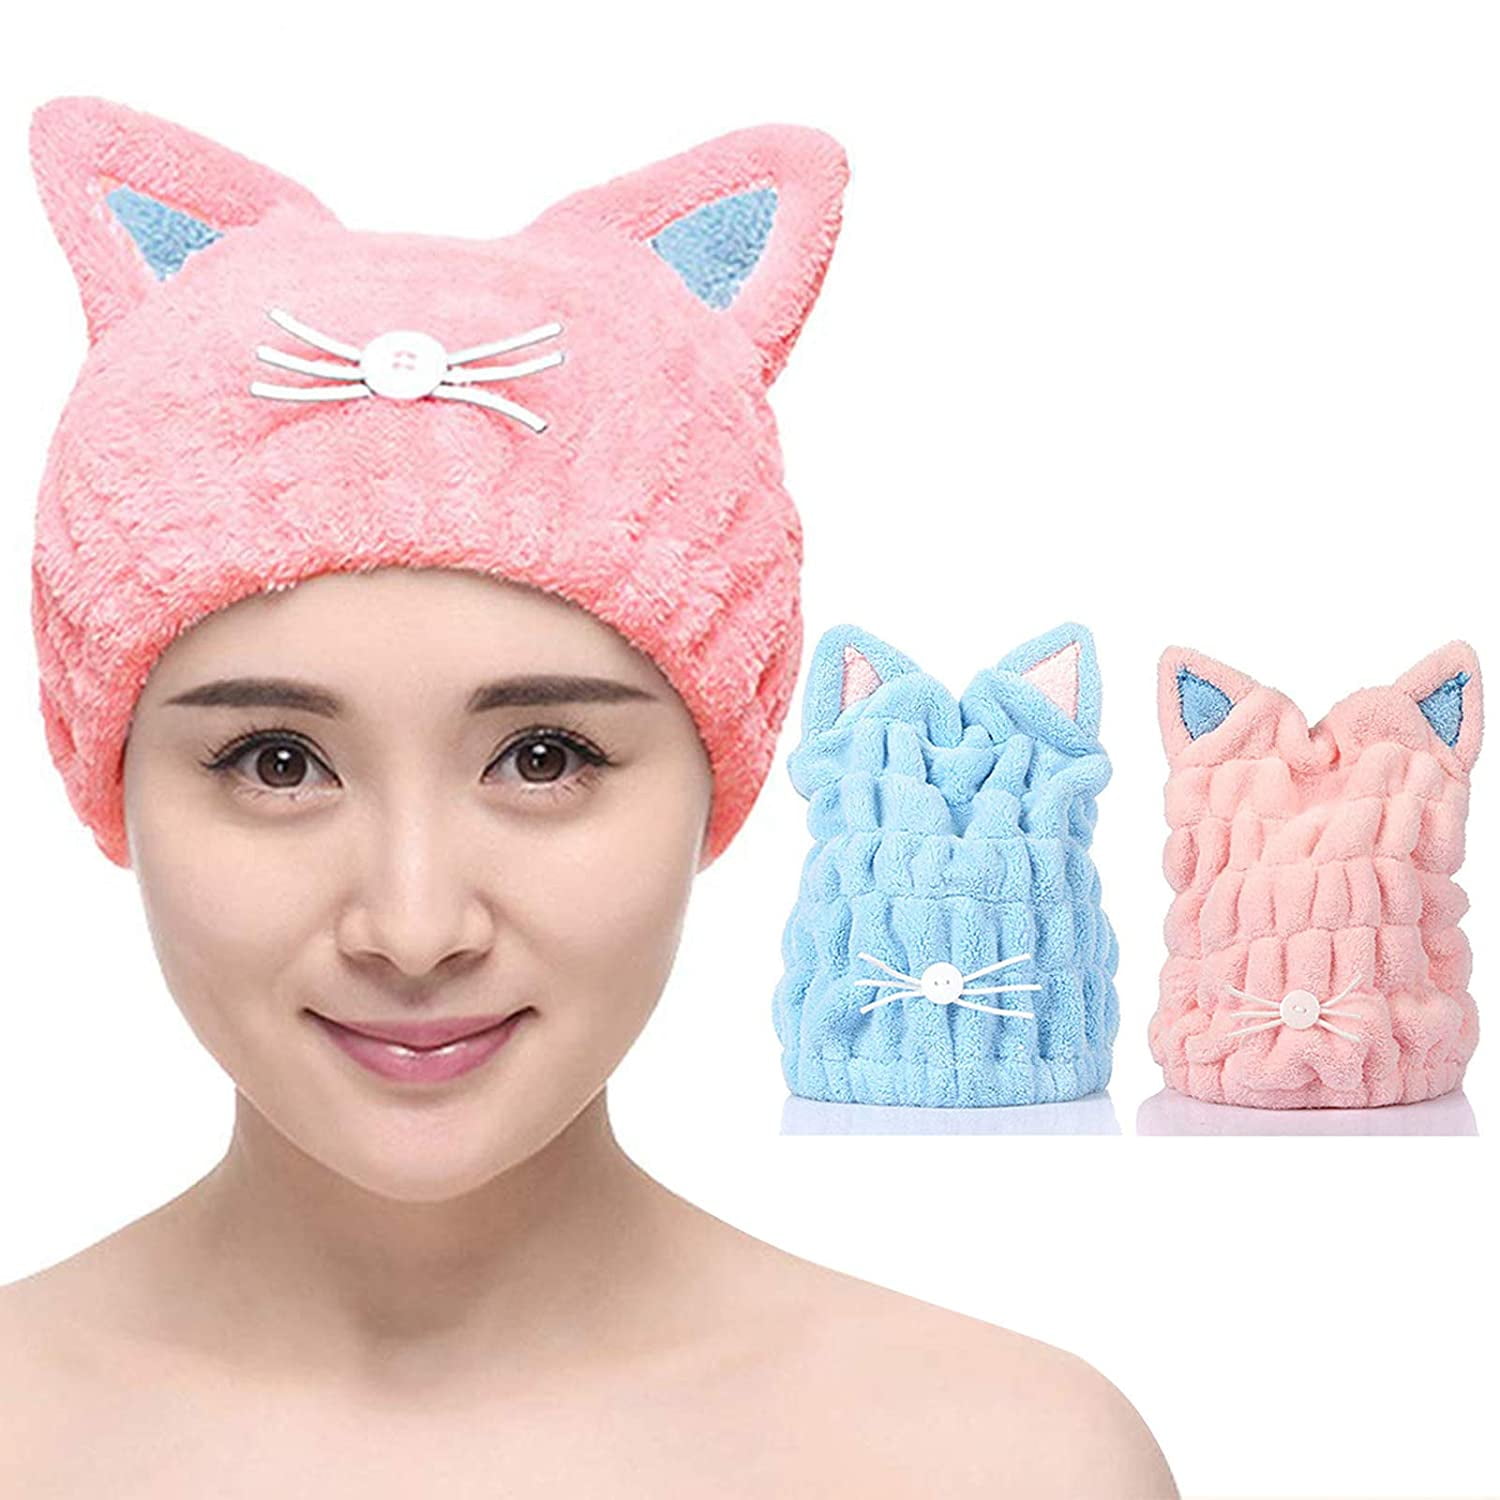 Soft Microfiber Cute Cat Ear Hair Drying Cap Super Absorbent Quick Drying Hair Towel Wrap With Coral Fleece For Womens Girls Ladies Bath Accessories pink